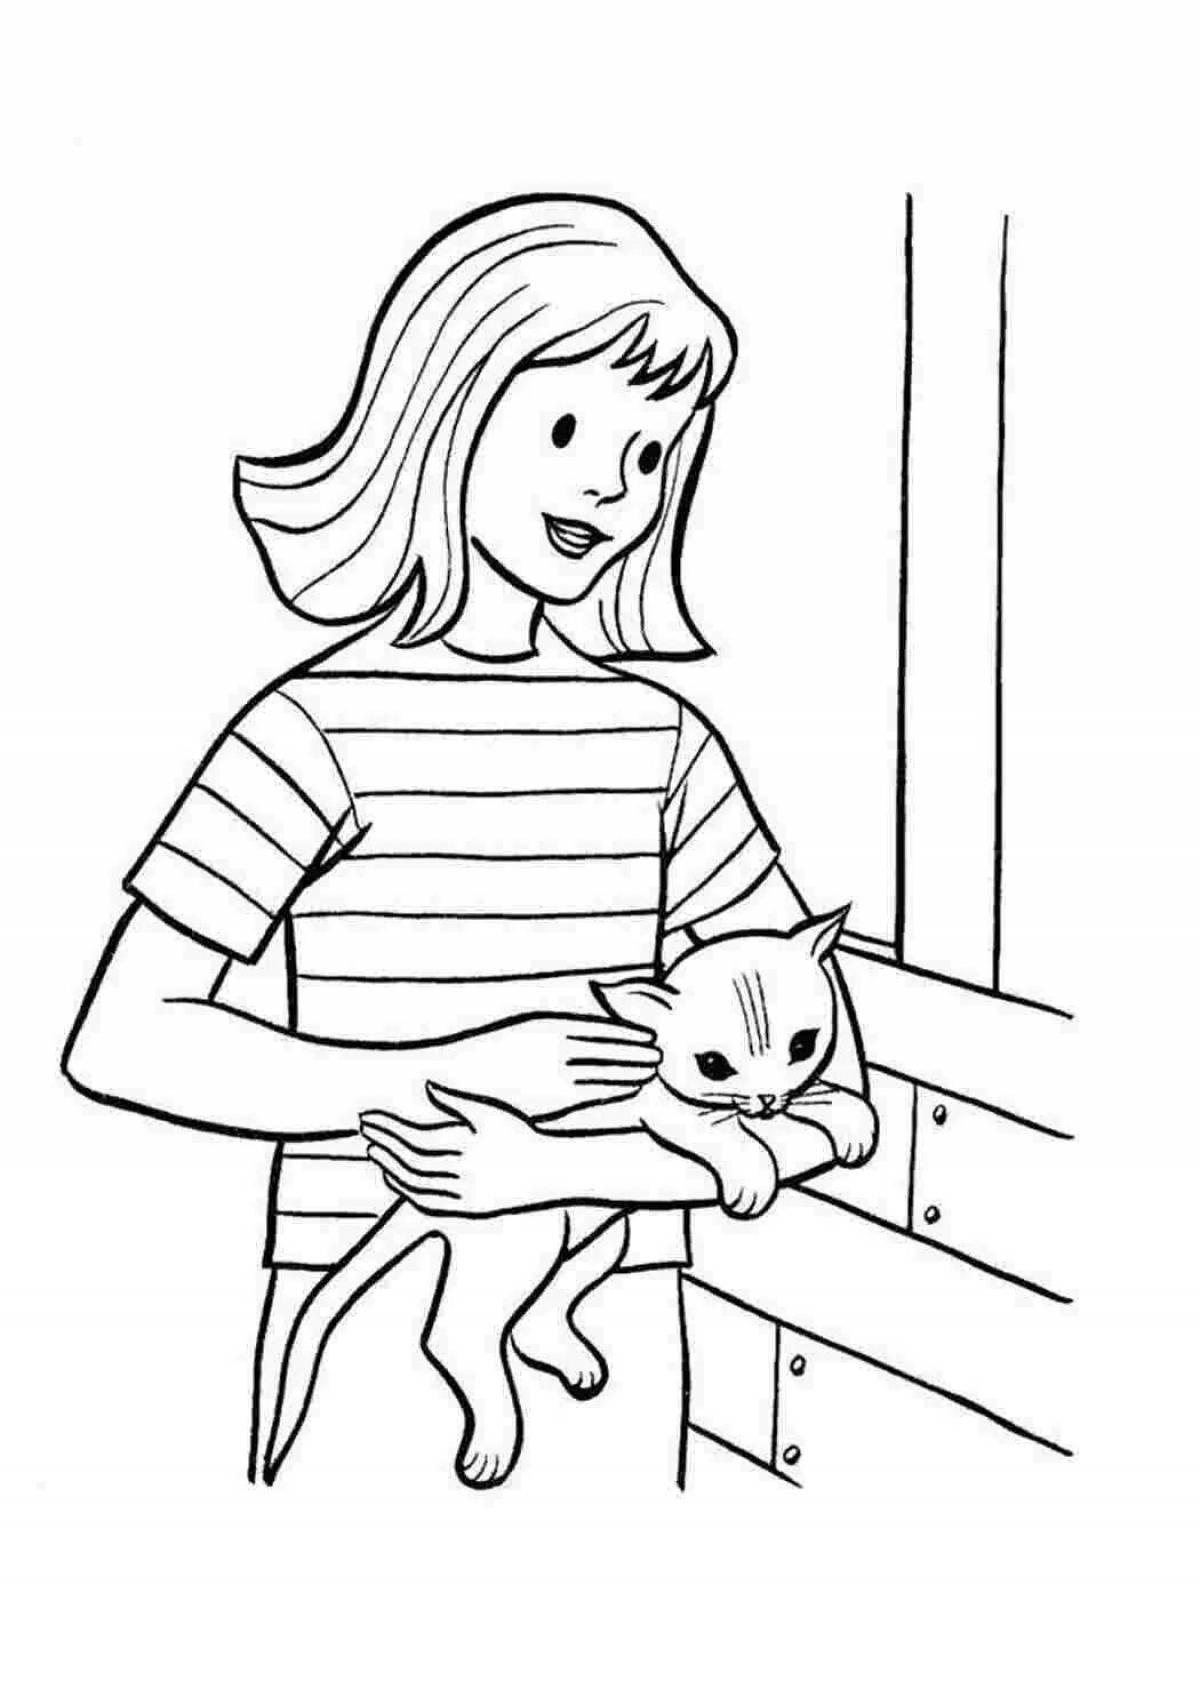 Amazing coloring book of a girl with a cat